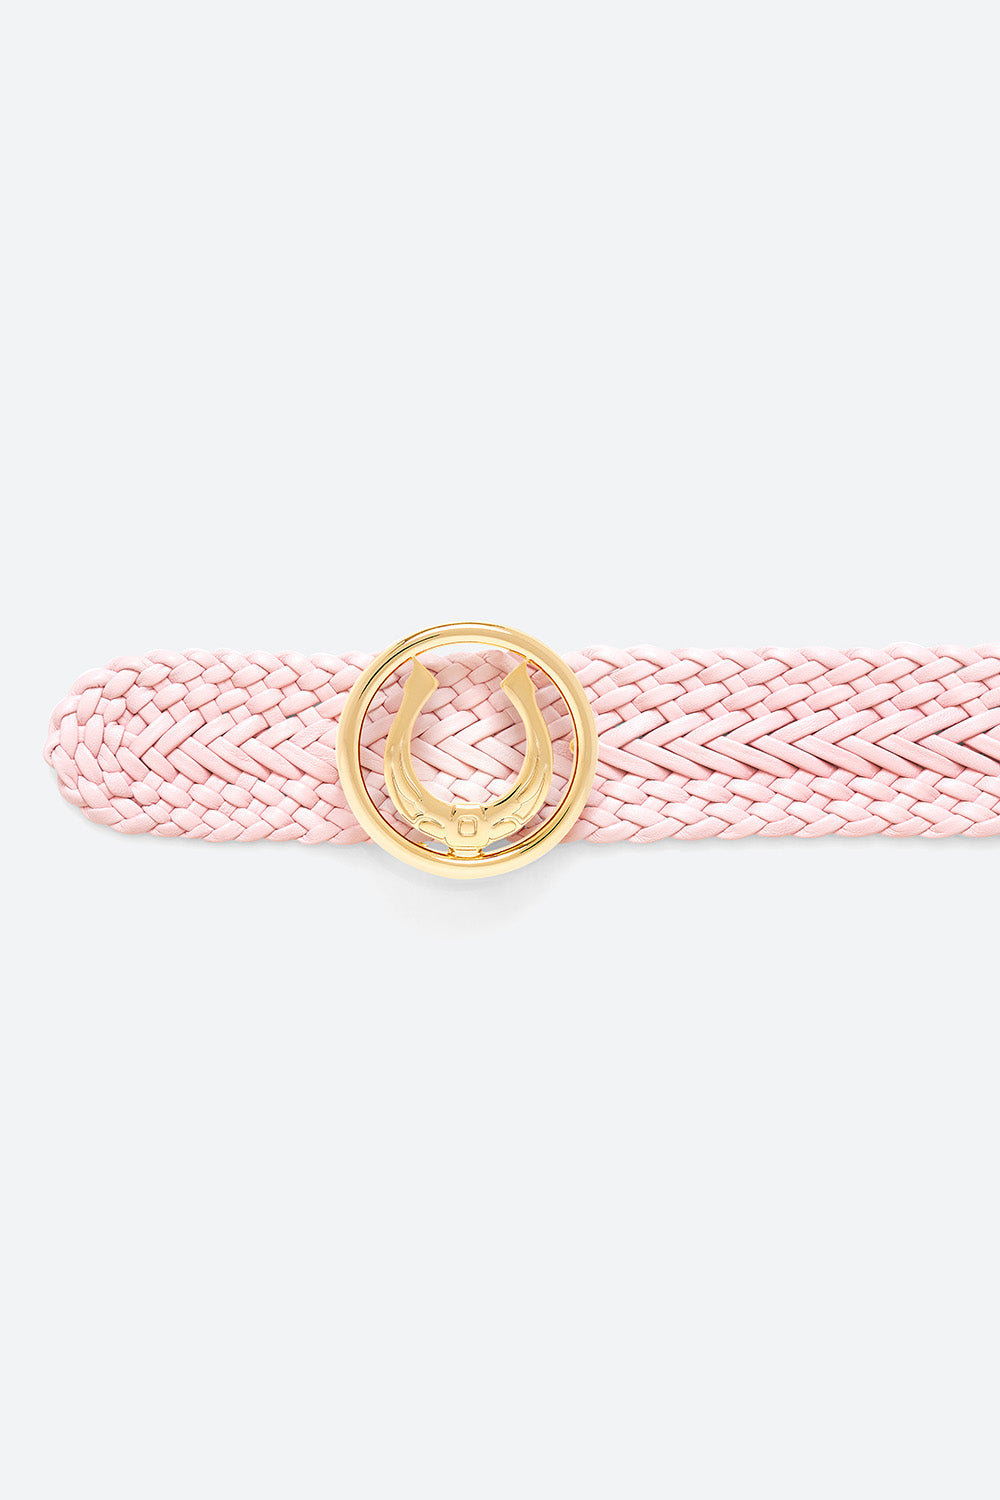 Men's Lucky Belt in Peony Pink, Polished Gold-toned Horseshoe Buckle